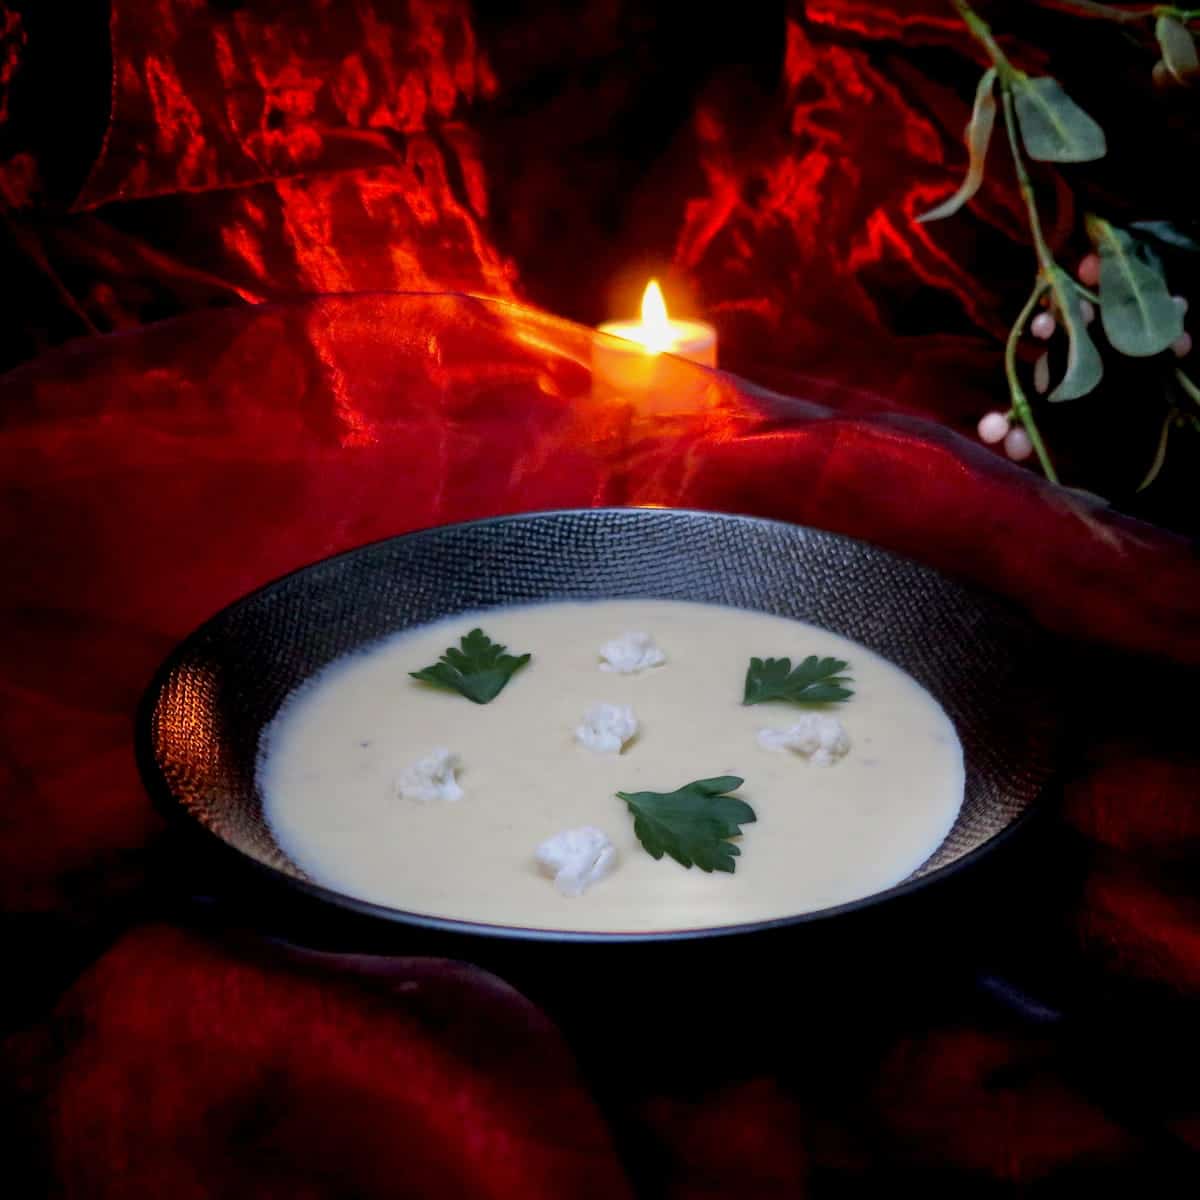 bowl of cauliflower cream soup garnished with florets, parsley and by candlelight and mistletoe